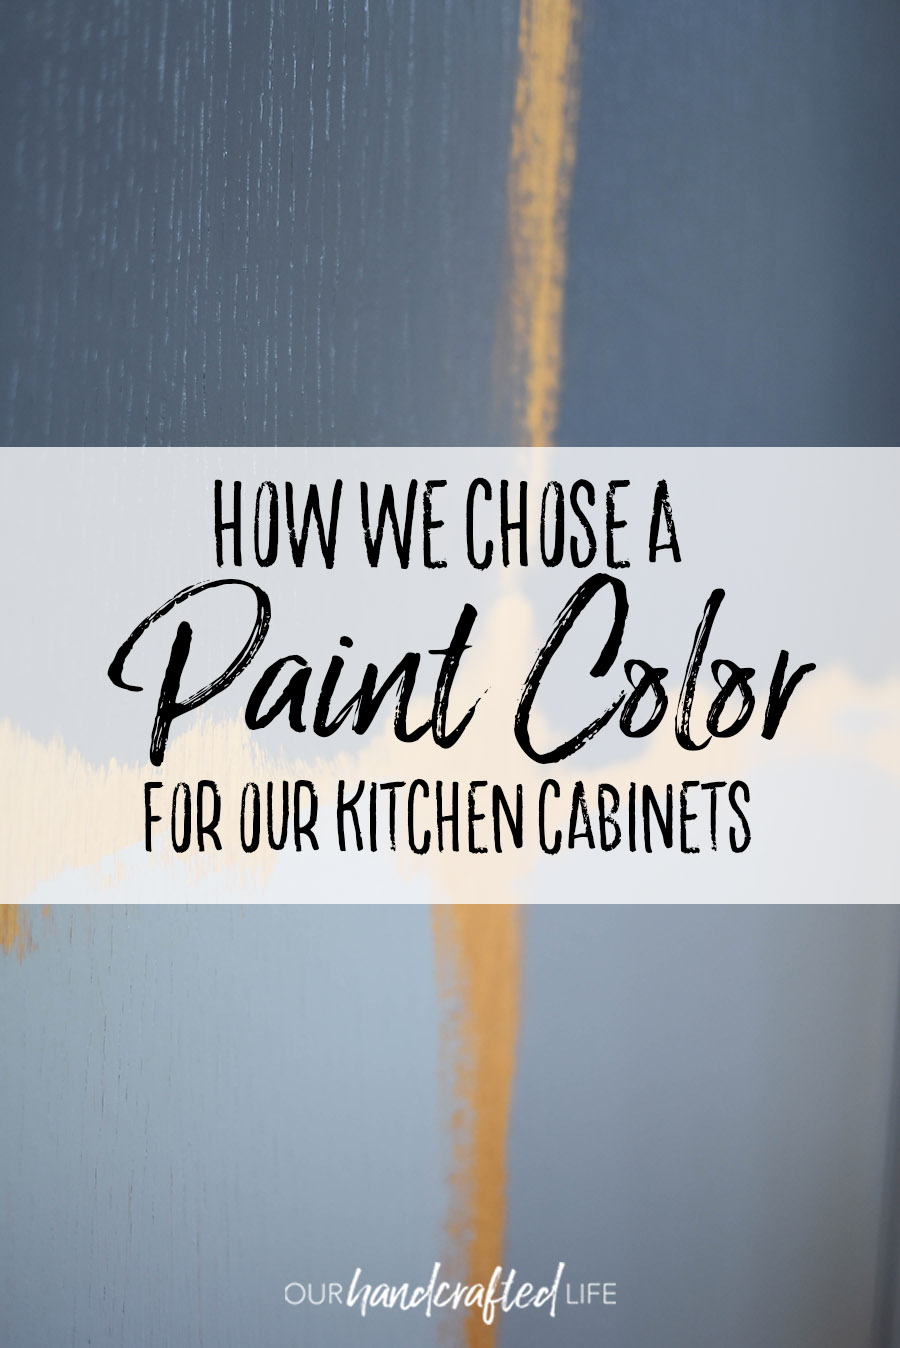 Choosing A Paint Color For The Cabinets Our Handcrafted Life